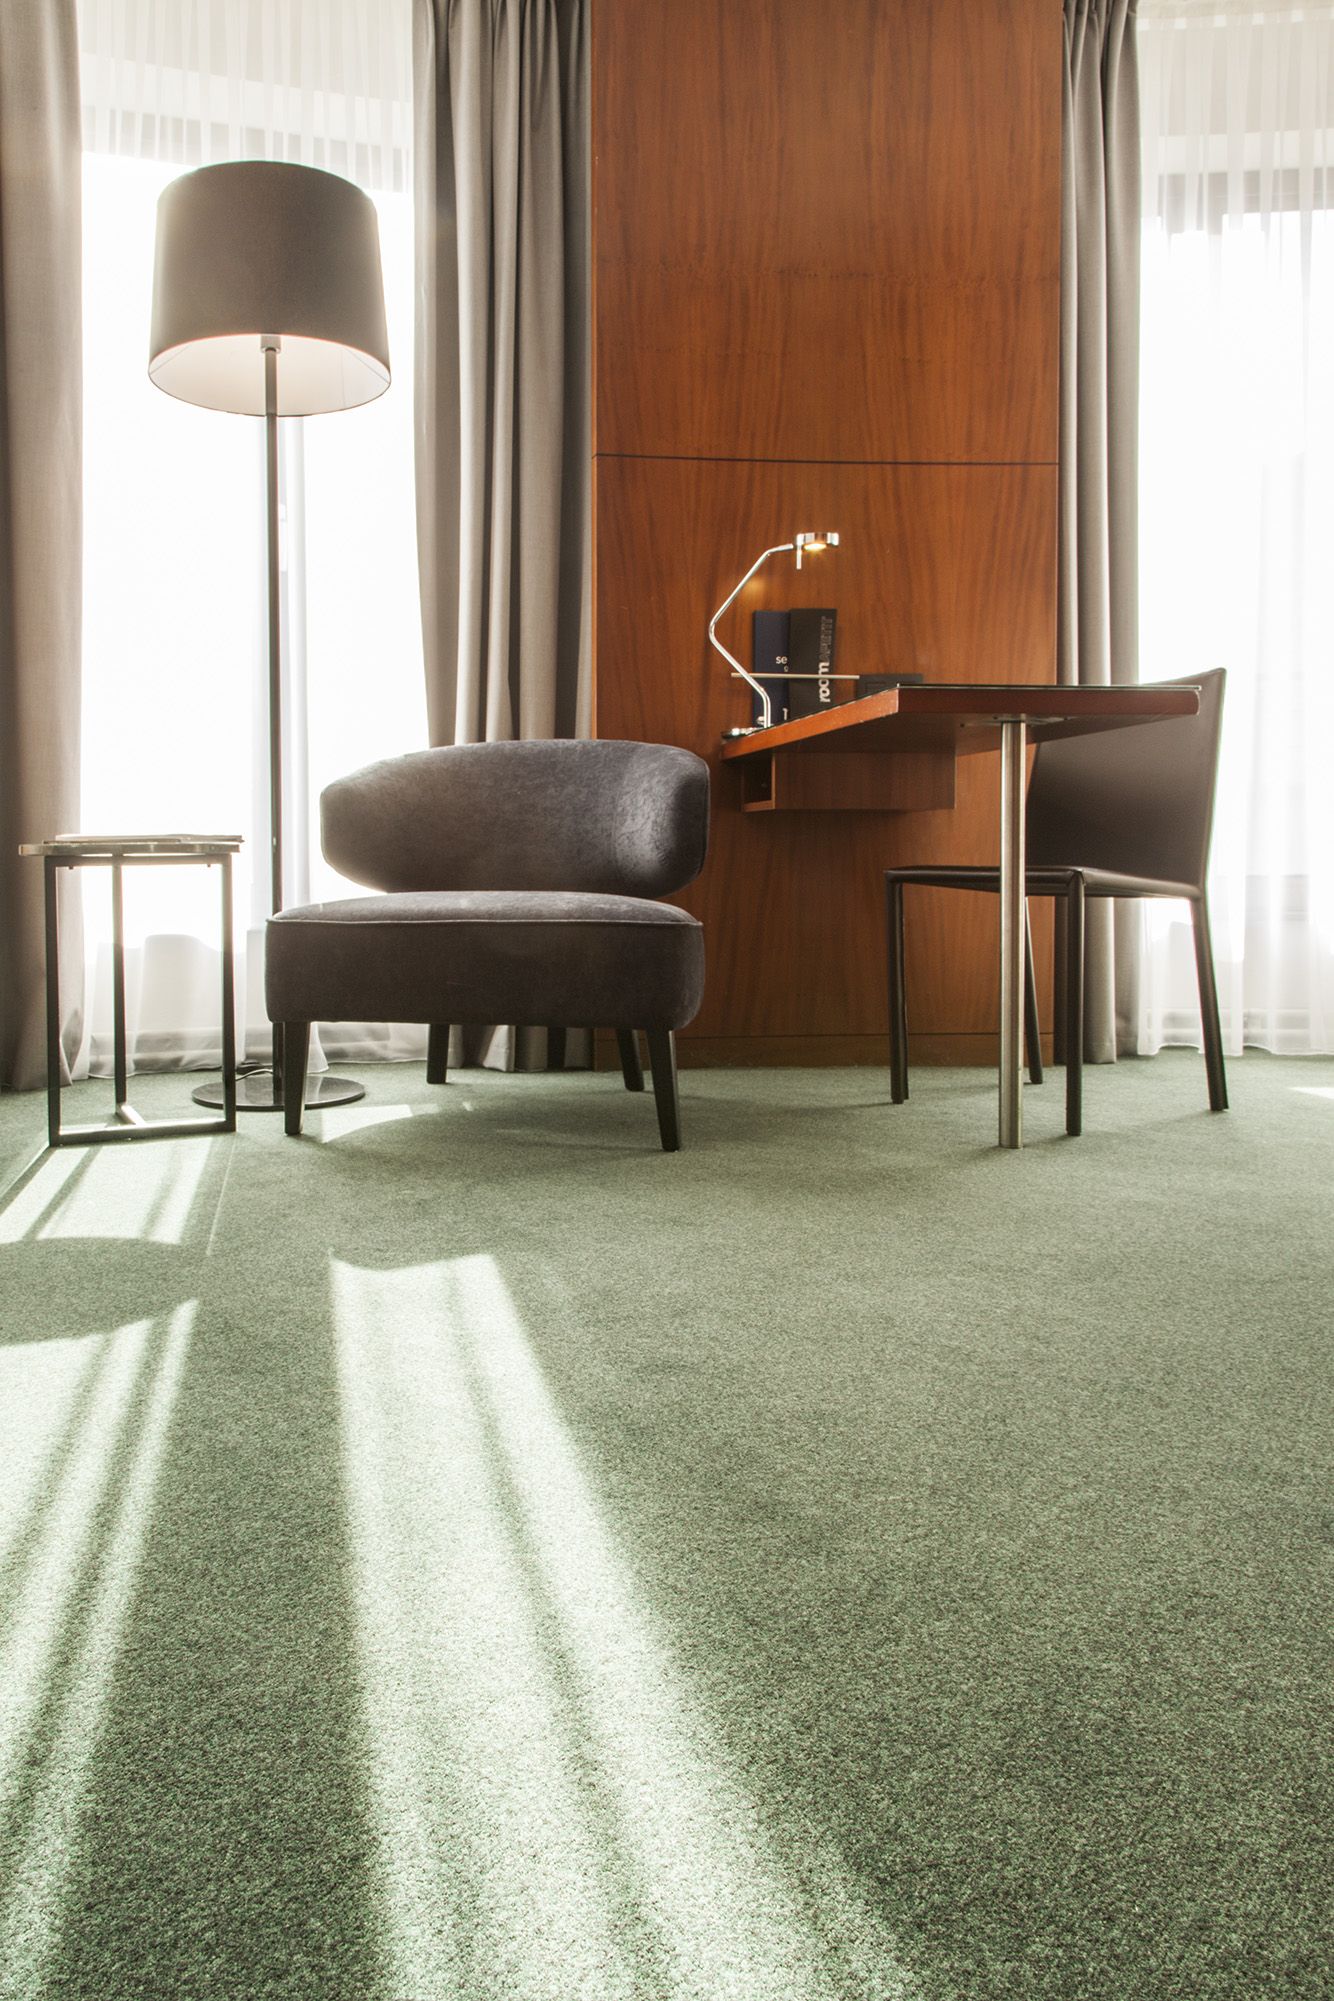 Carpet can improve your commercial place